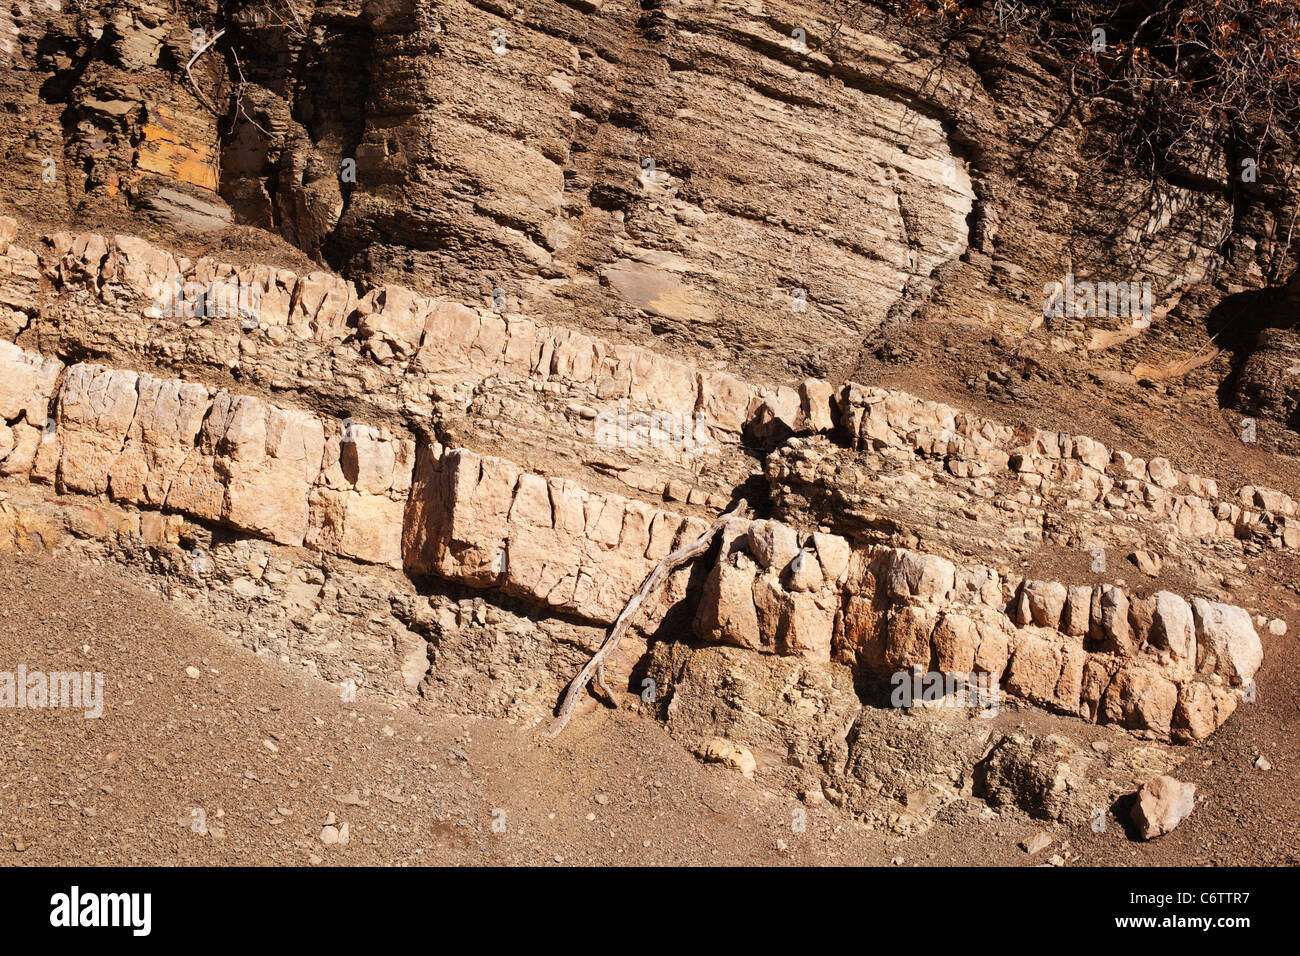 Ancient tilted and sedimentary rock exposure on Sandia Peak, New Mexico. Stock Photo